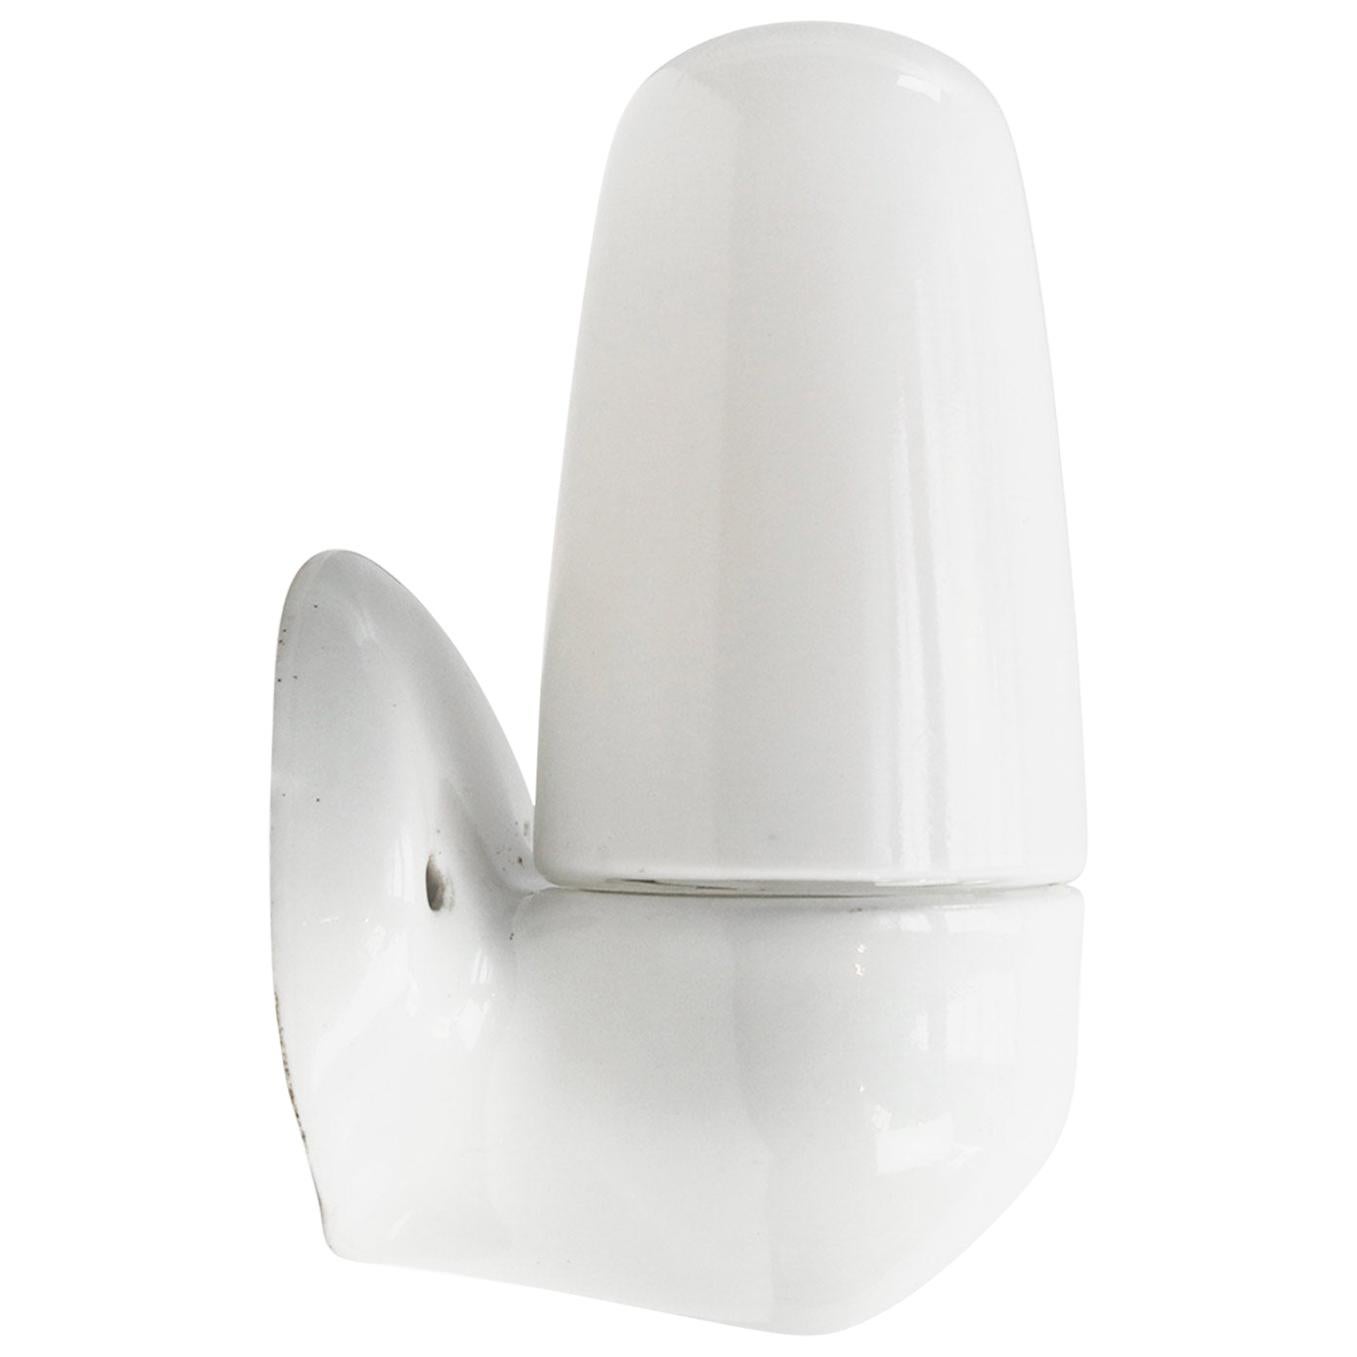 White Porcelain Wall Lamp, Scone No. 6067 by Wilhelm Wagenfeld